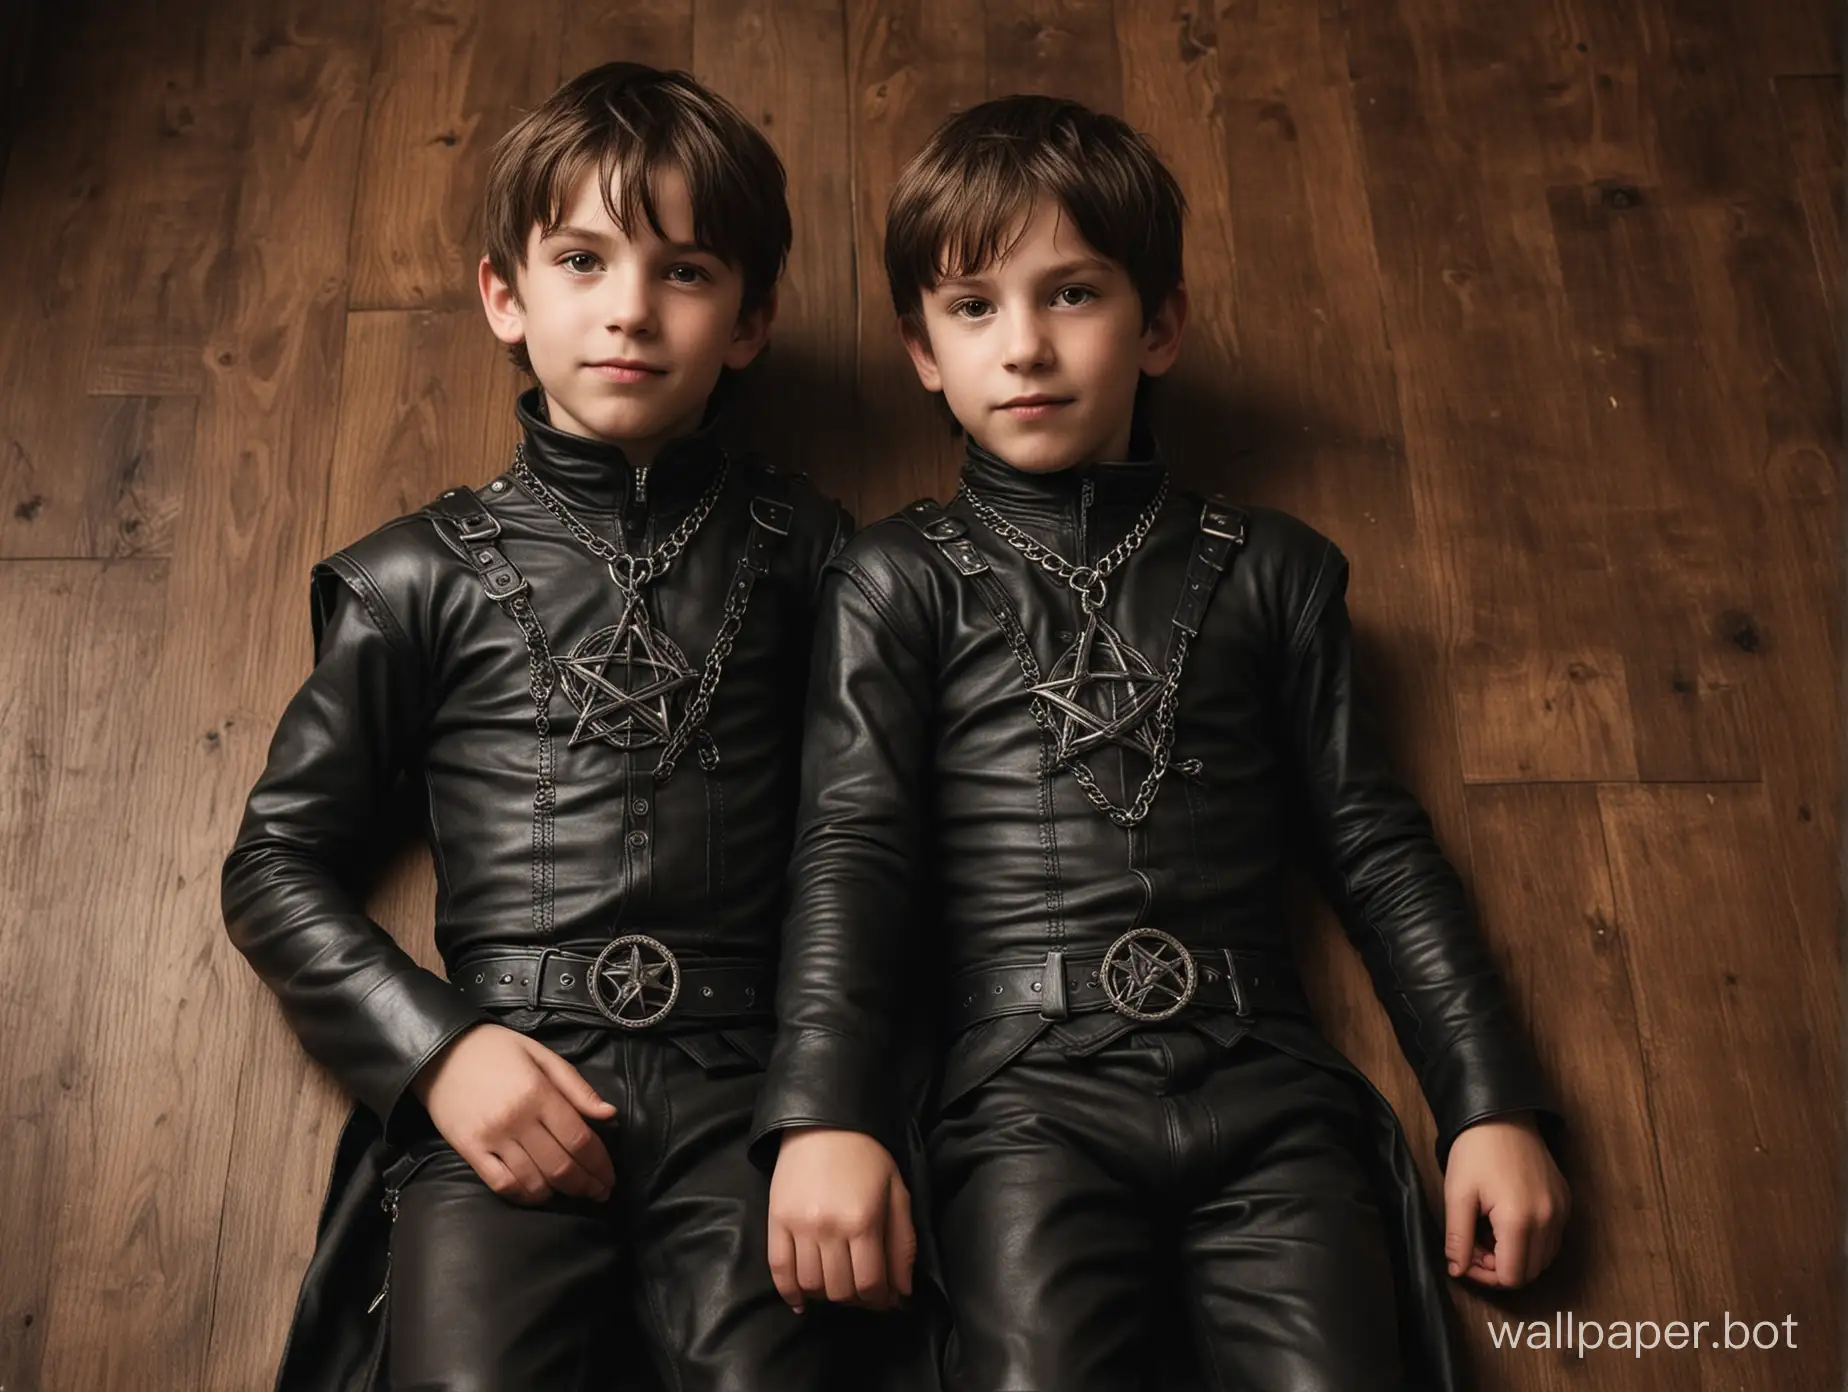 Two young boys, no older than ten, lying side by side on a cold, hardwood floor. Their wrists and ankles are securely bound with thick leather straps, leaving them completely helpless. The older boy, who appears to be their older friend, stands over them, a sinister smile playing on his lips. He is dressed head to toe in black leather, his muscles tense and defined beneath the supple material. His chest is adorned with a large pendant depicting a pentagram, a symbol of his twisted devotion to the dark arts.